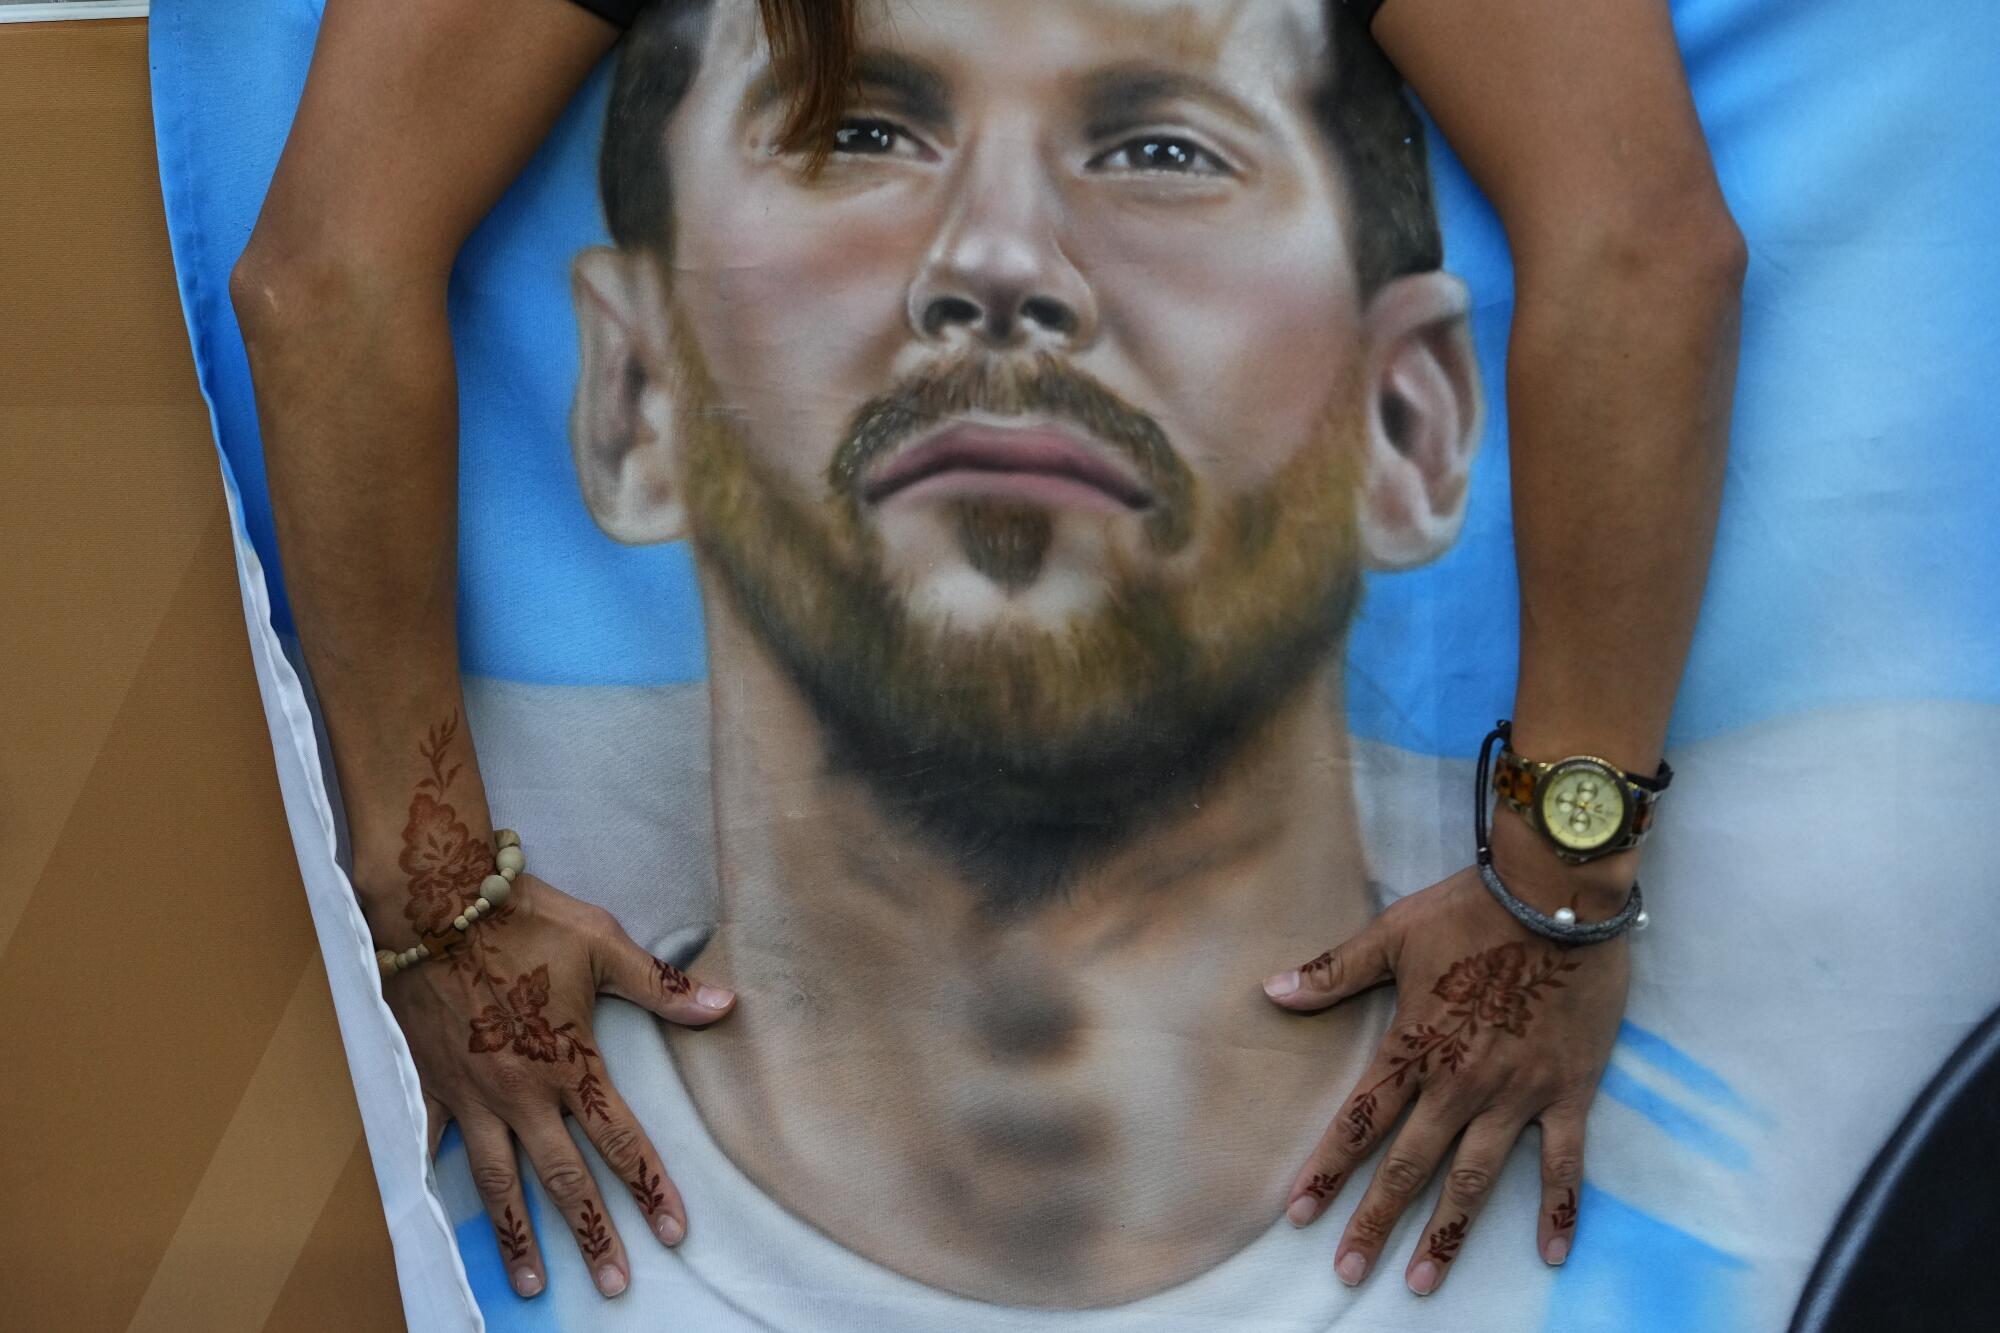 An Argentinian places a poster of their star player Lionel Messi's before the World Cup final.